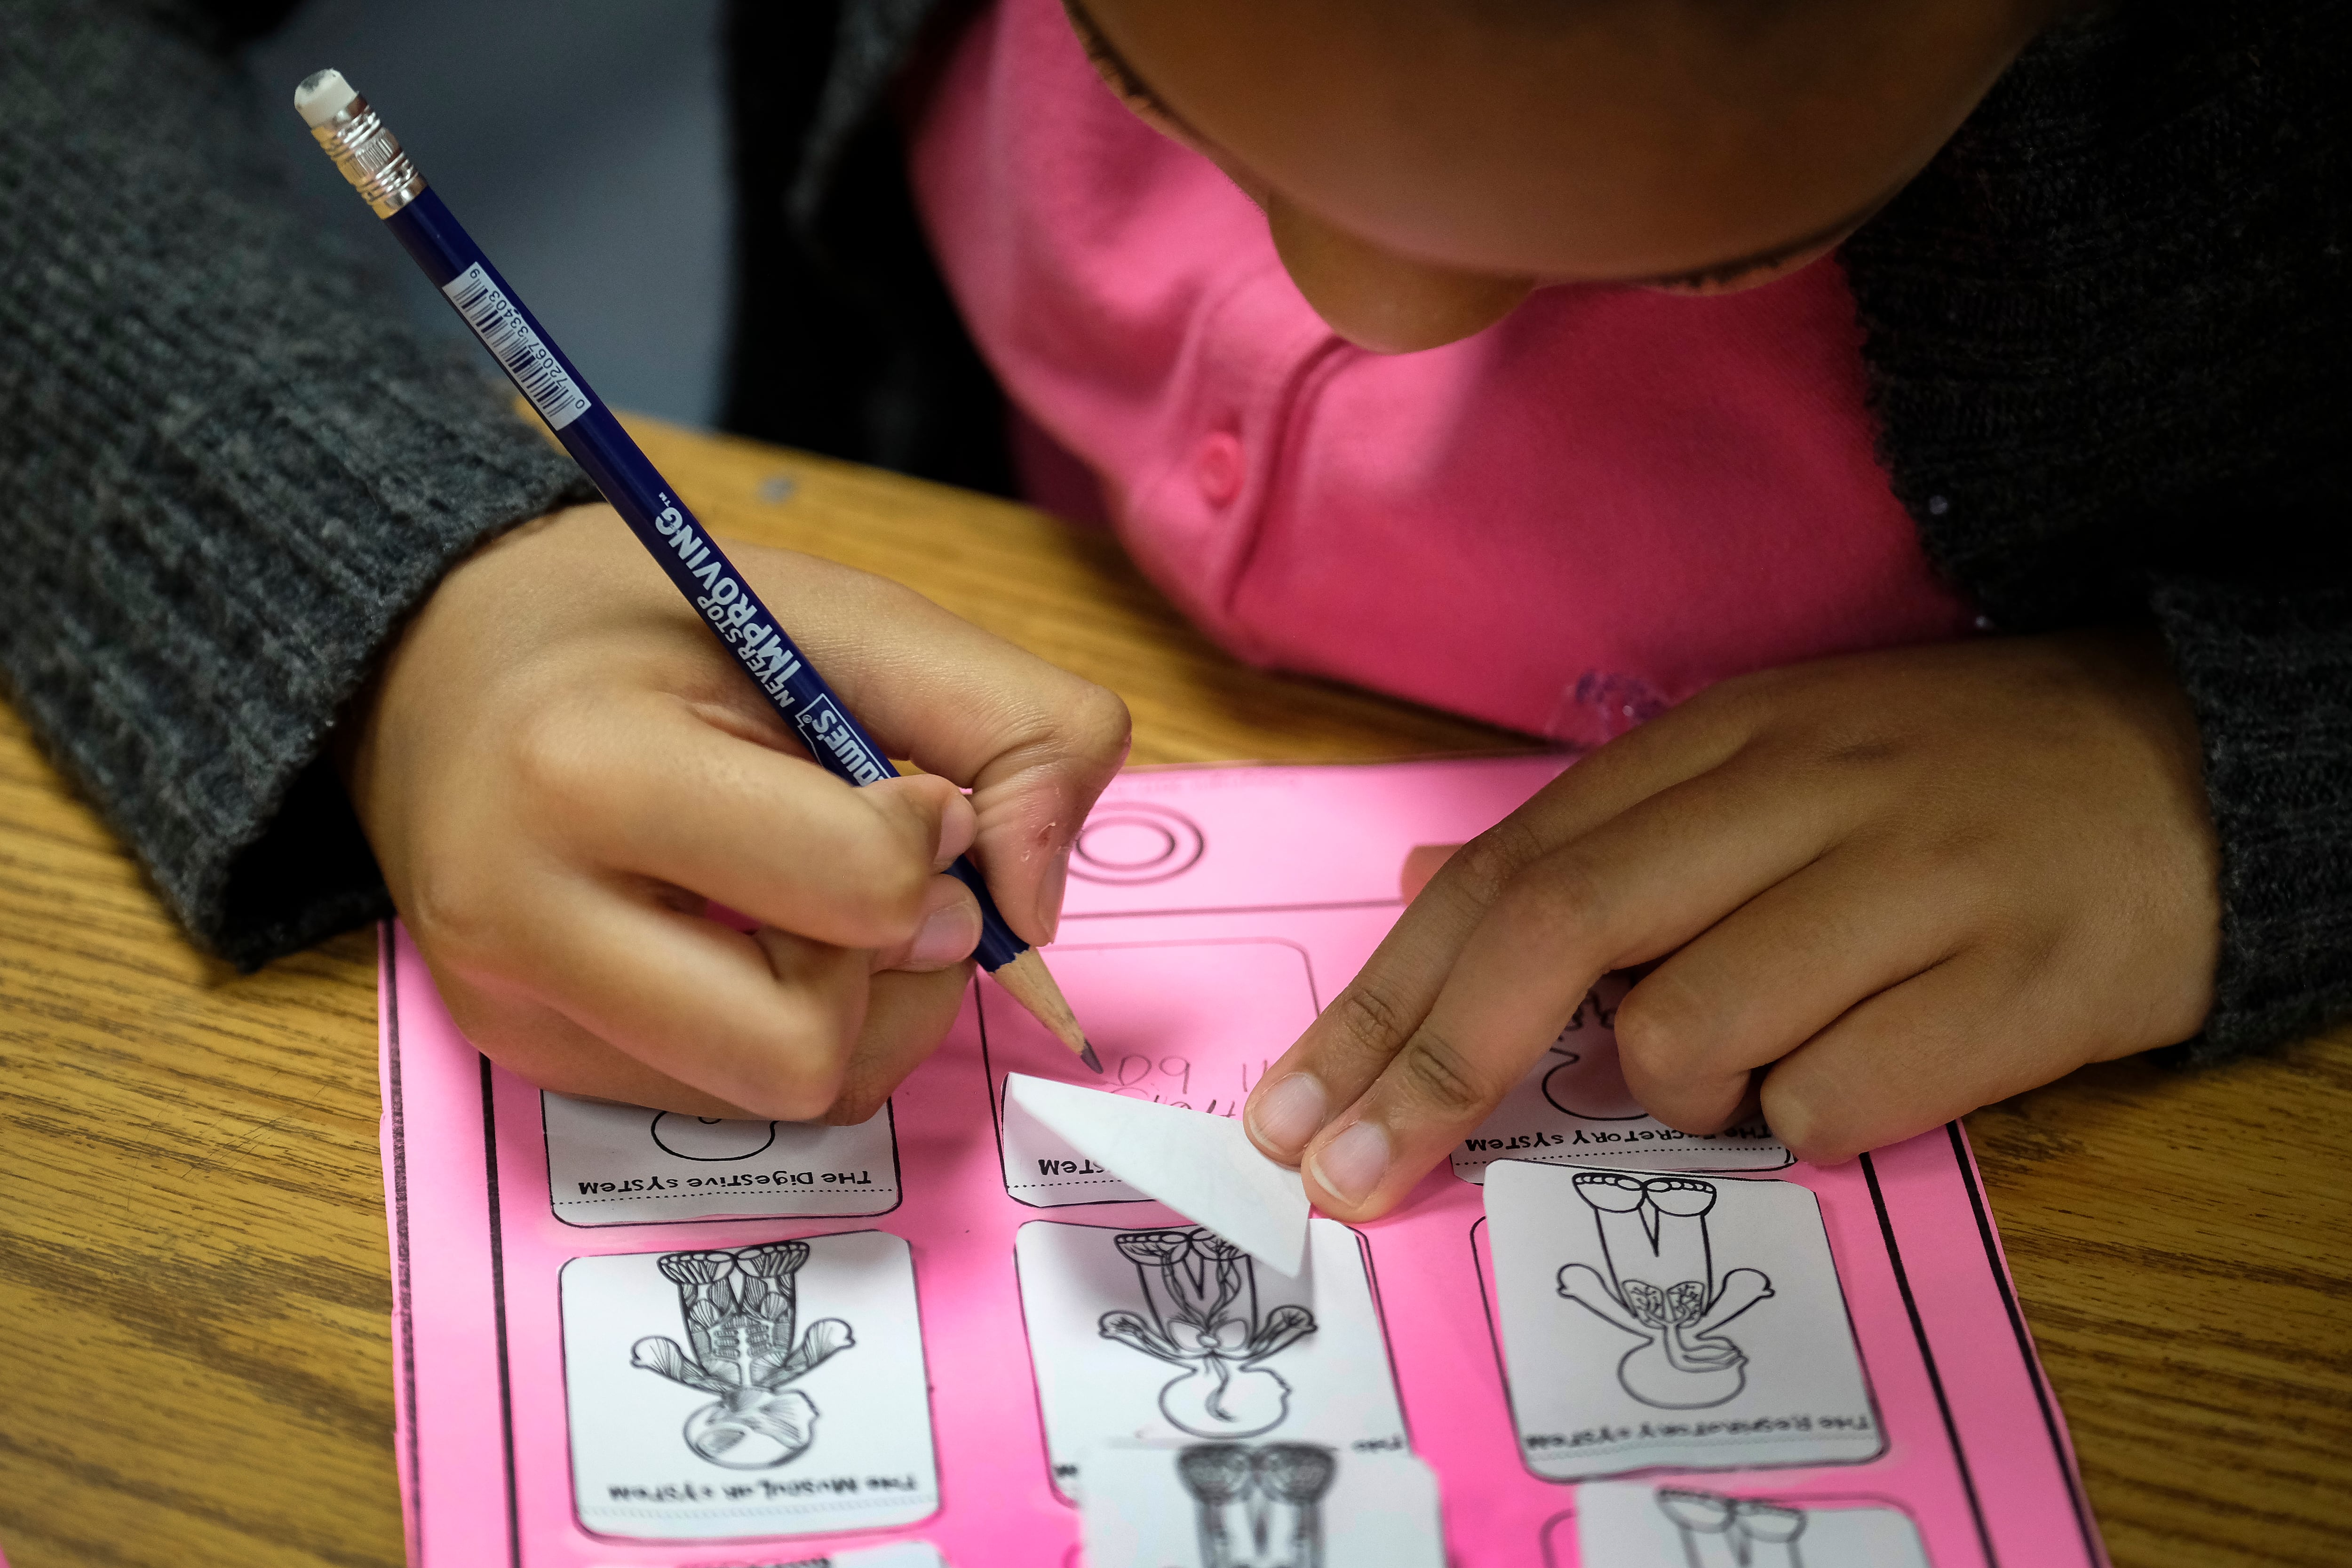 A student holds a pencil to fill out a pink-and-white worksheet.